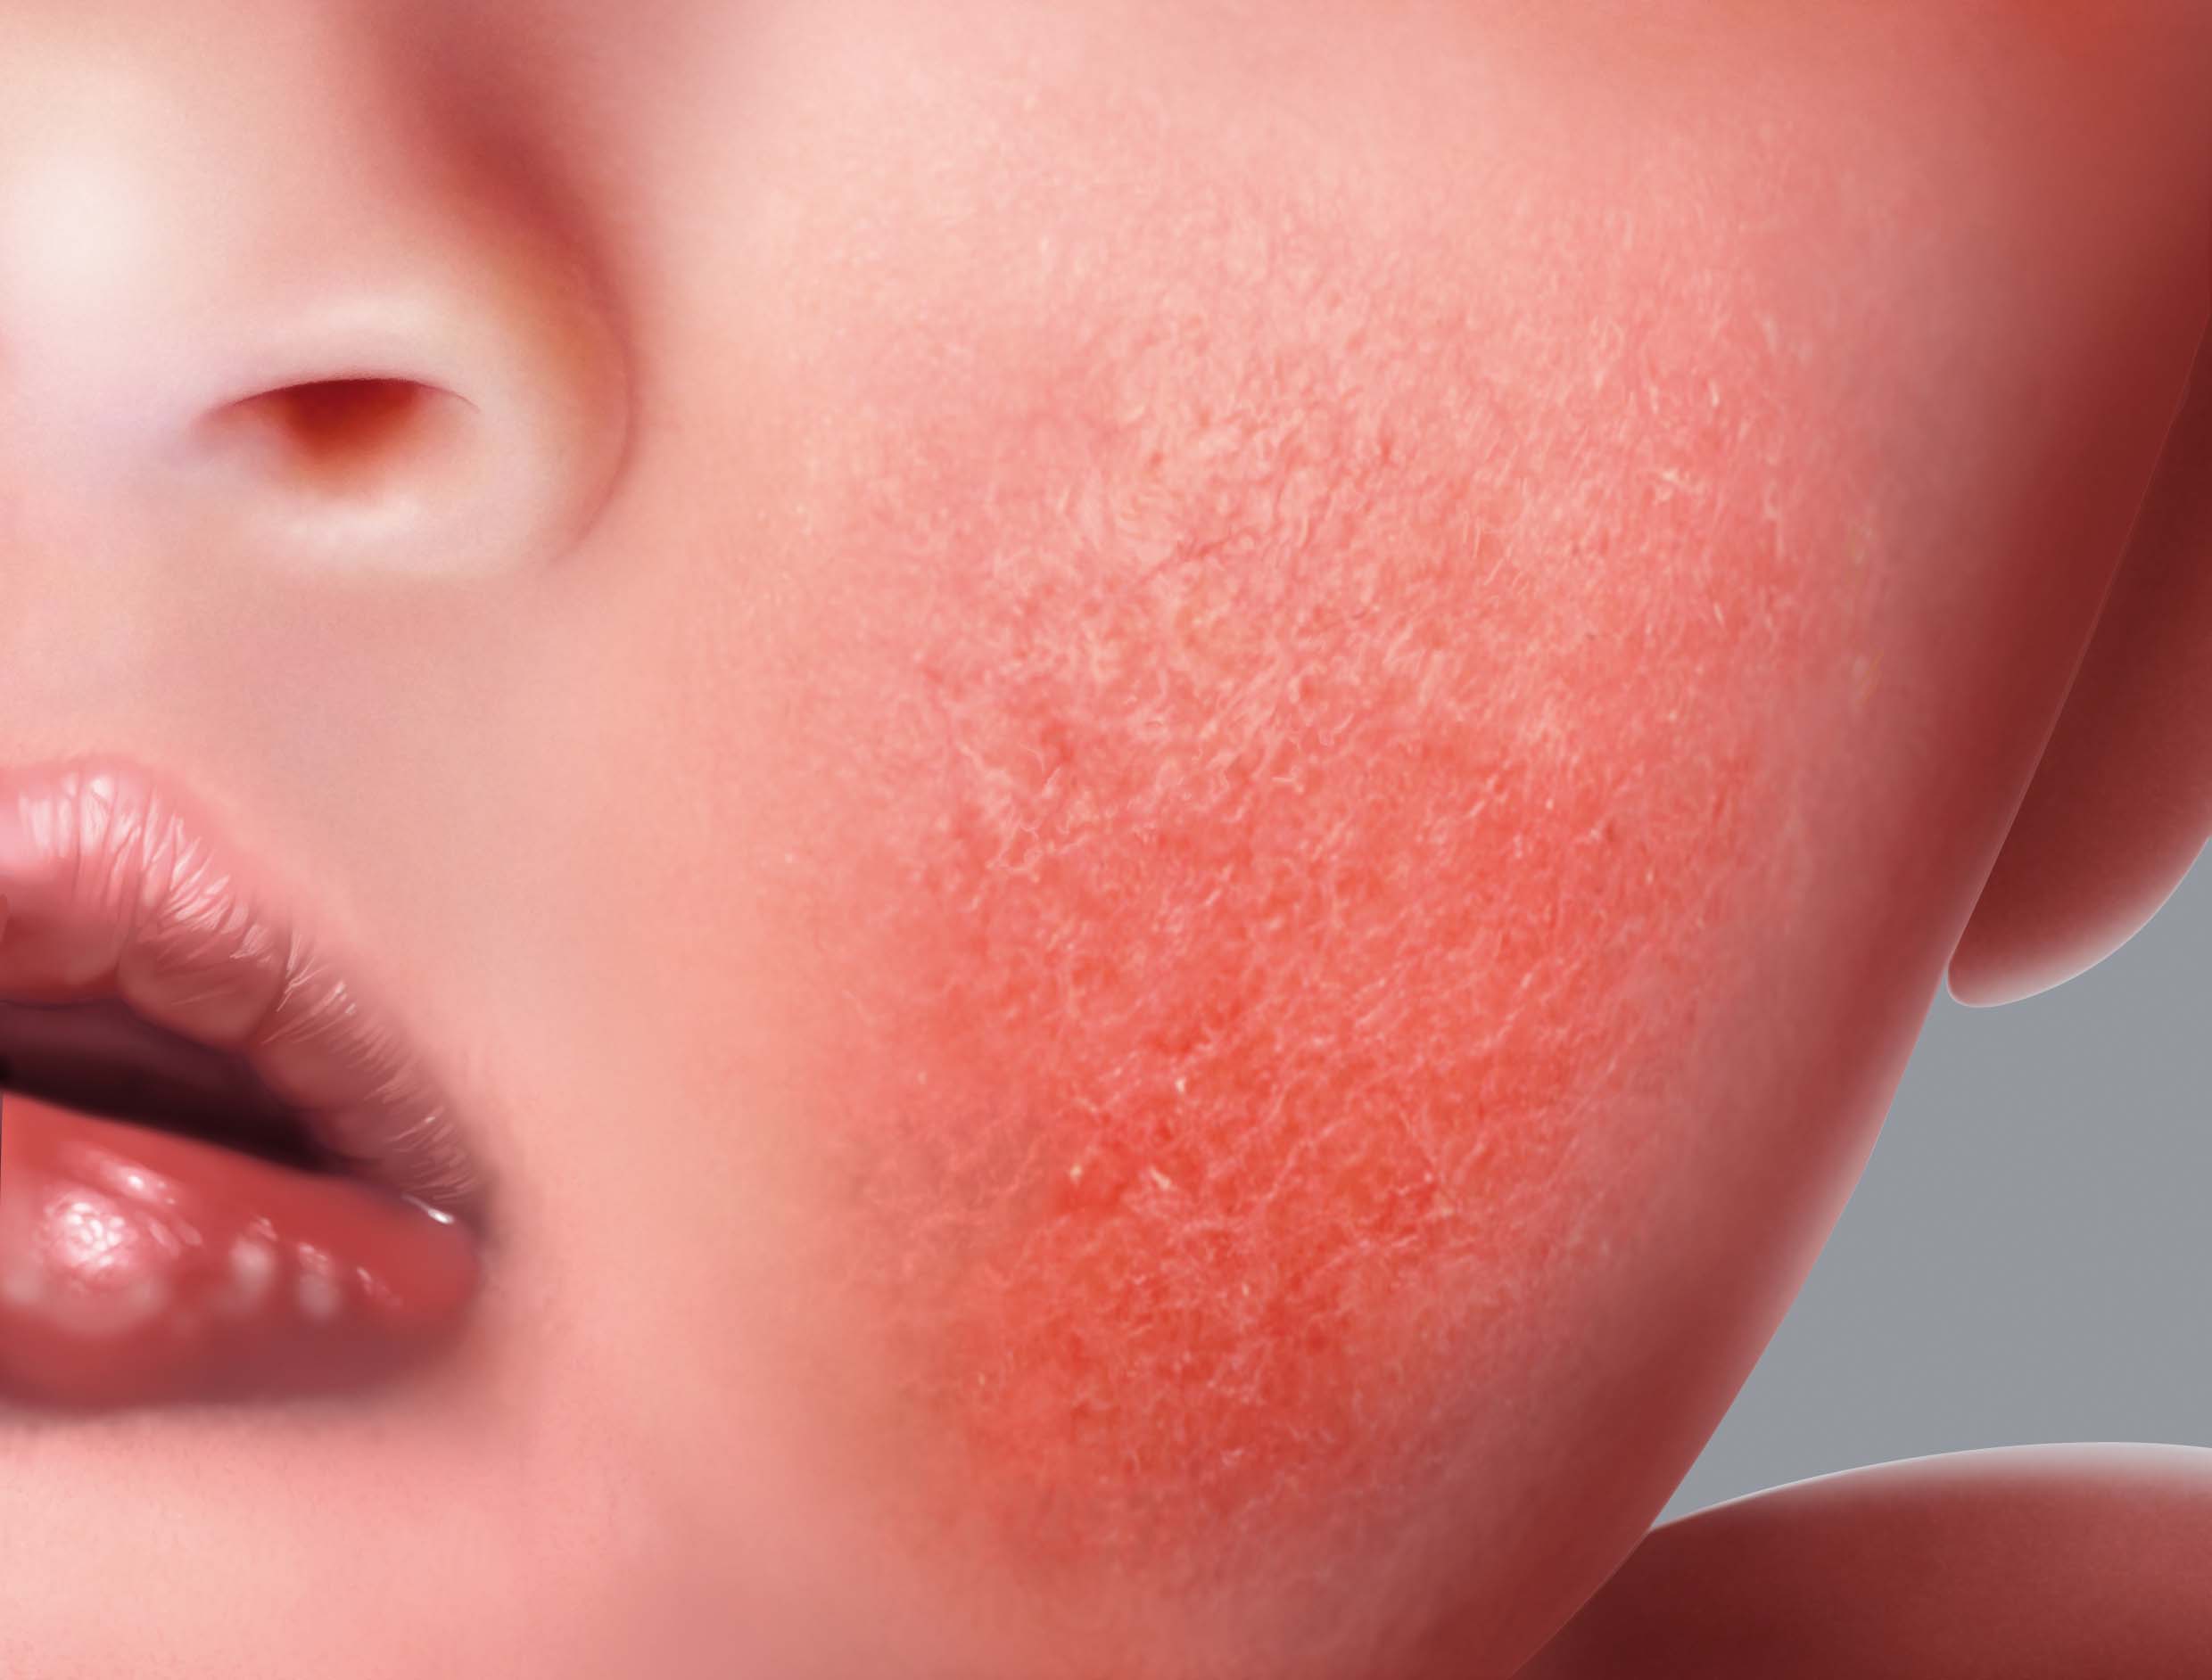 Atopic eczema symptoms: red patches or erythema